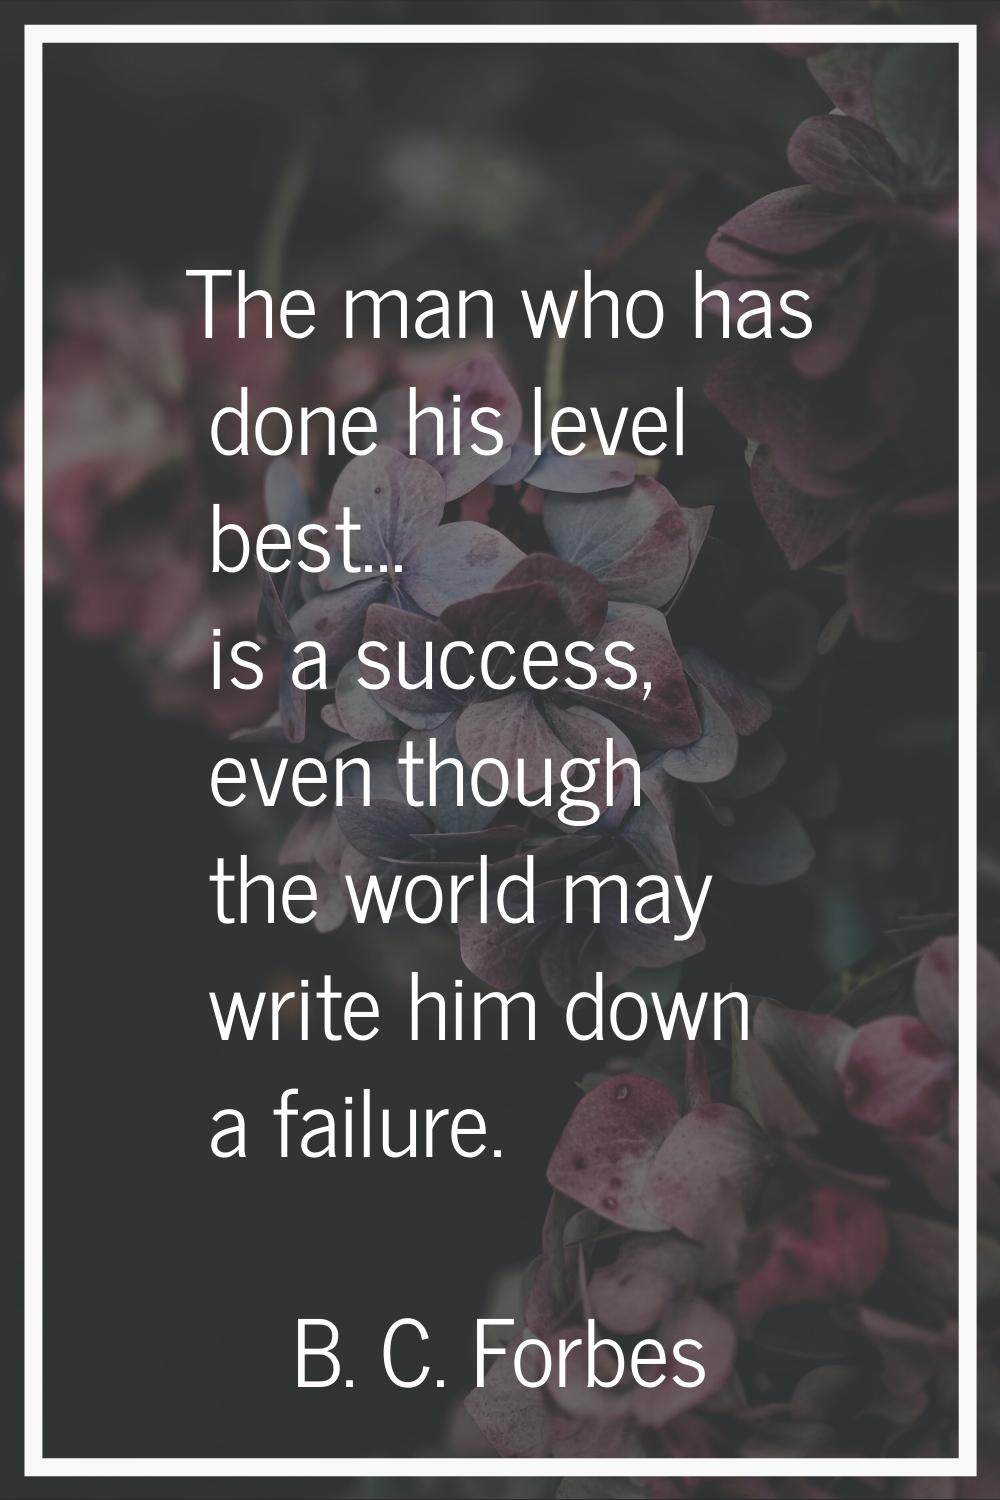 The man who has done his level best... is a success, even though the world may write him down a fai